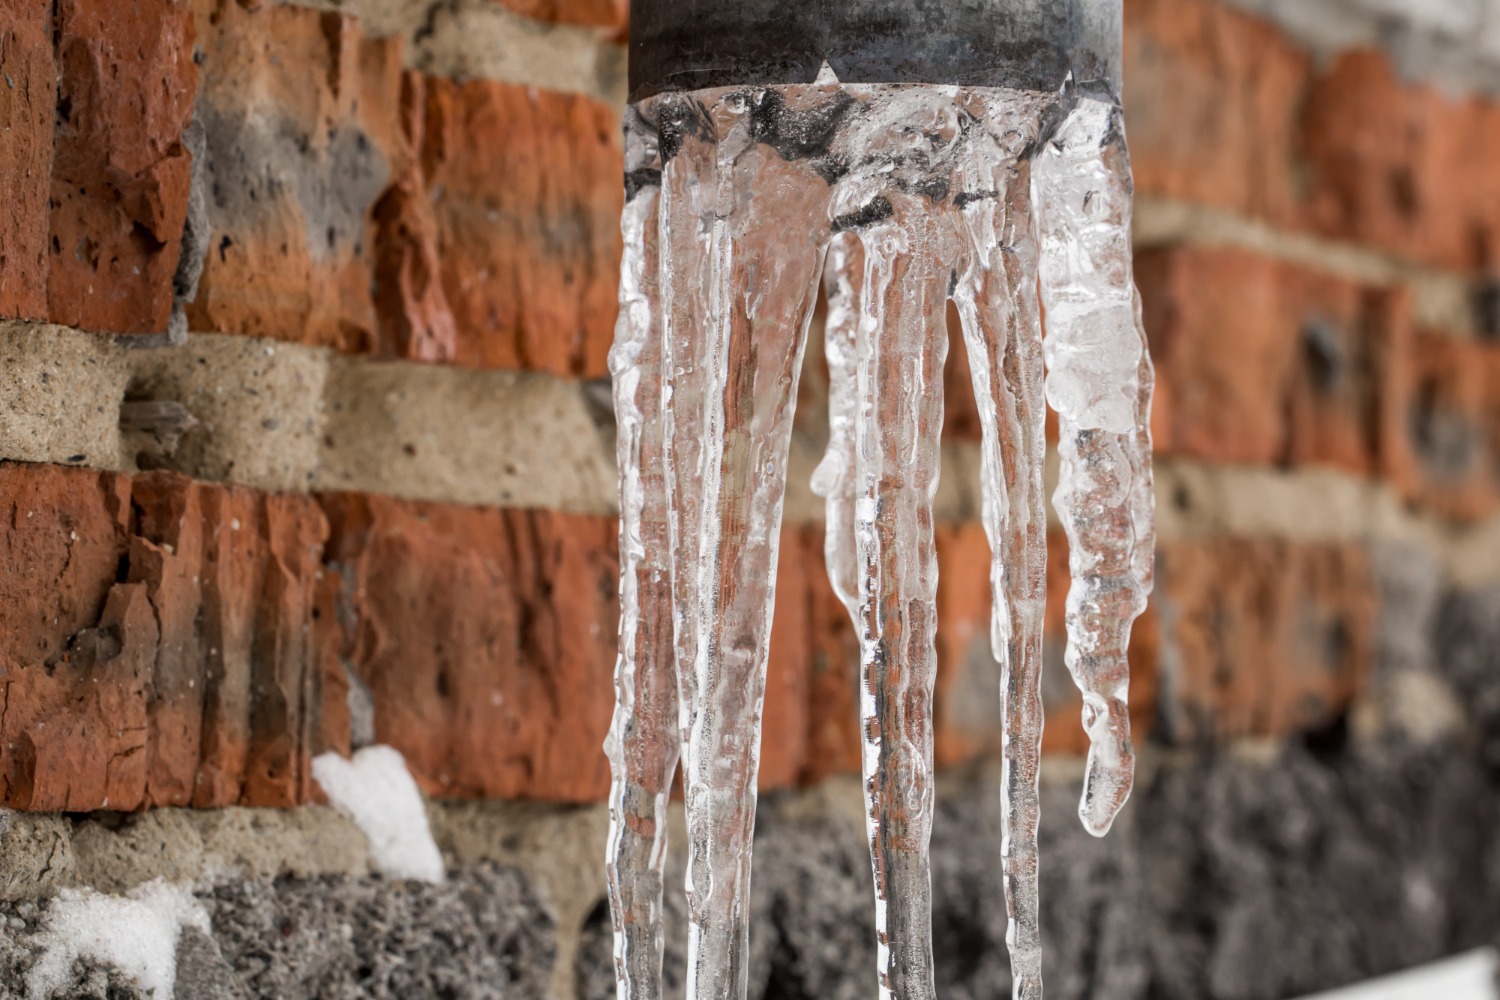 This outdoor drainage pipe is clogged with frozen water, creating hanging icicles which could risk causing frozen pipe disasters.